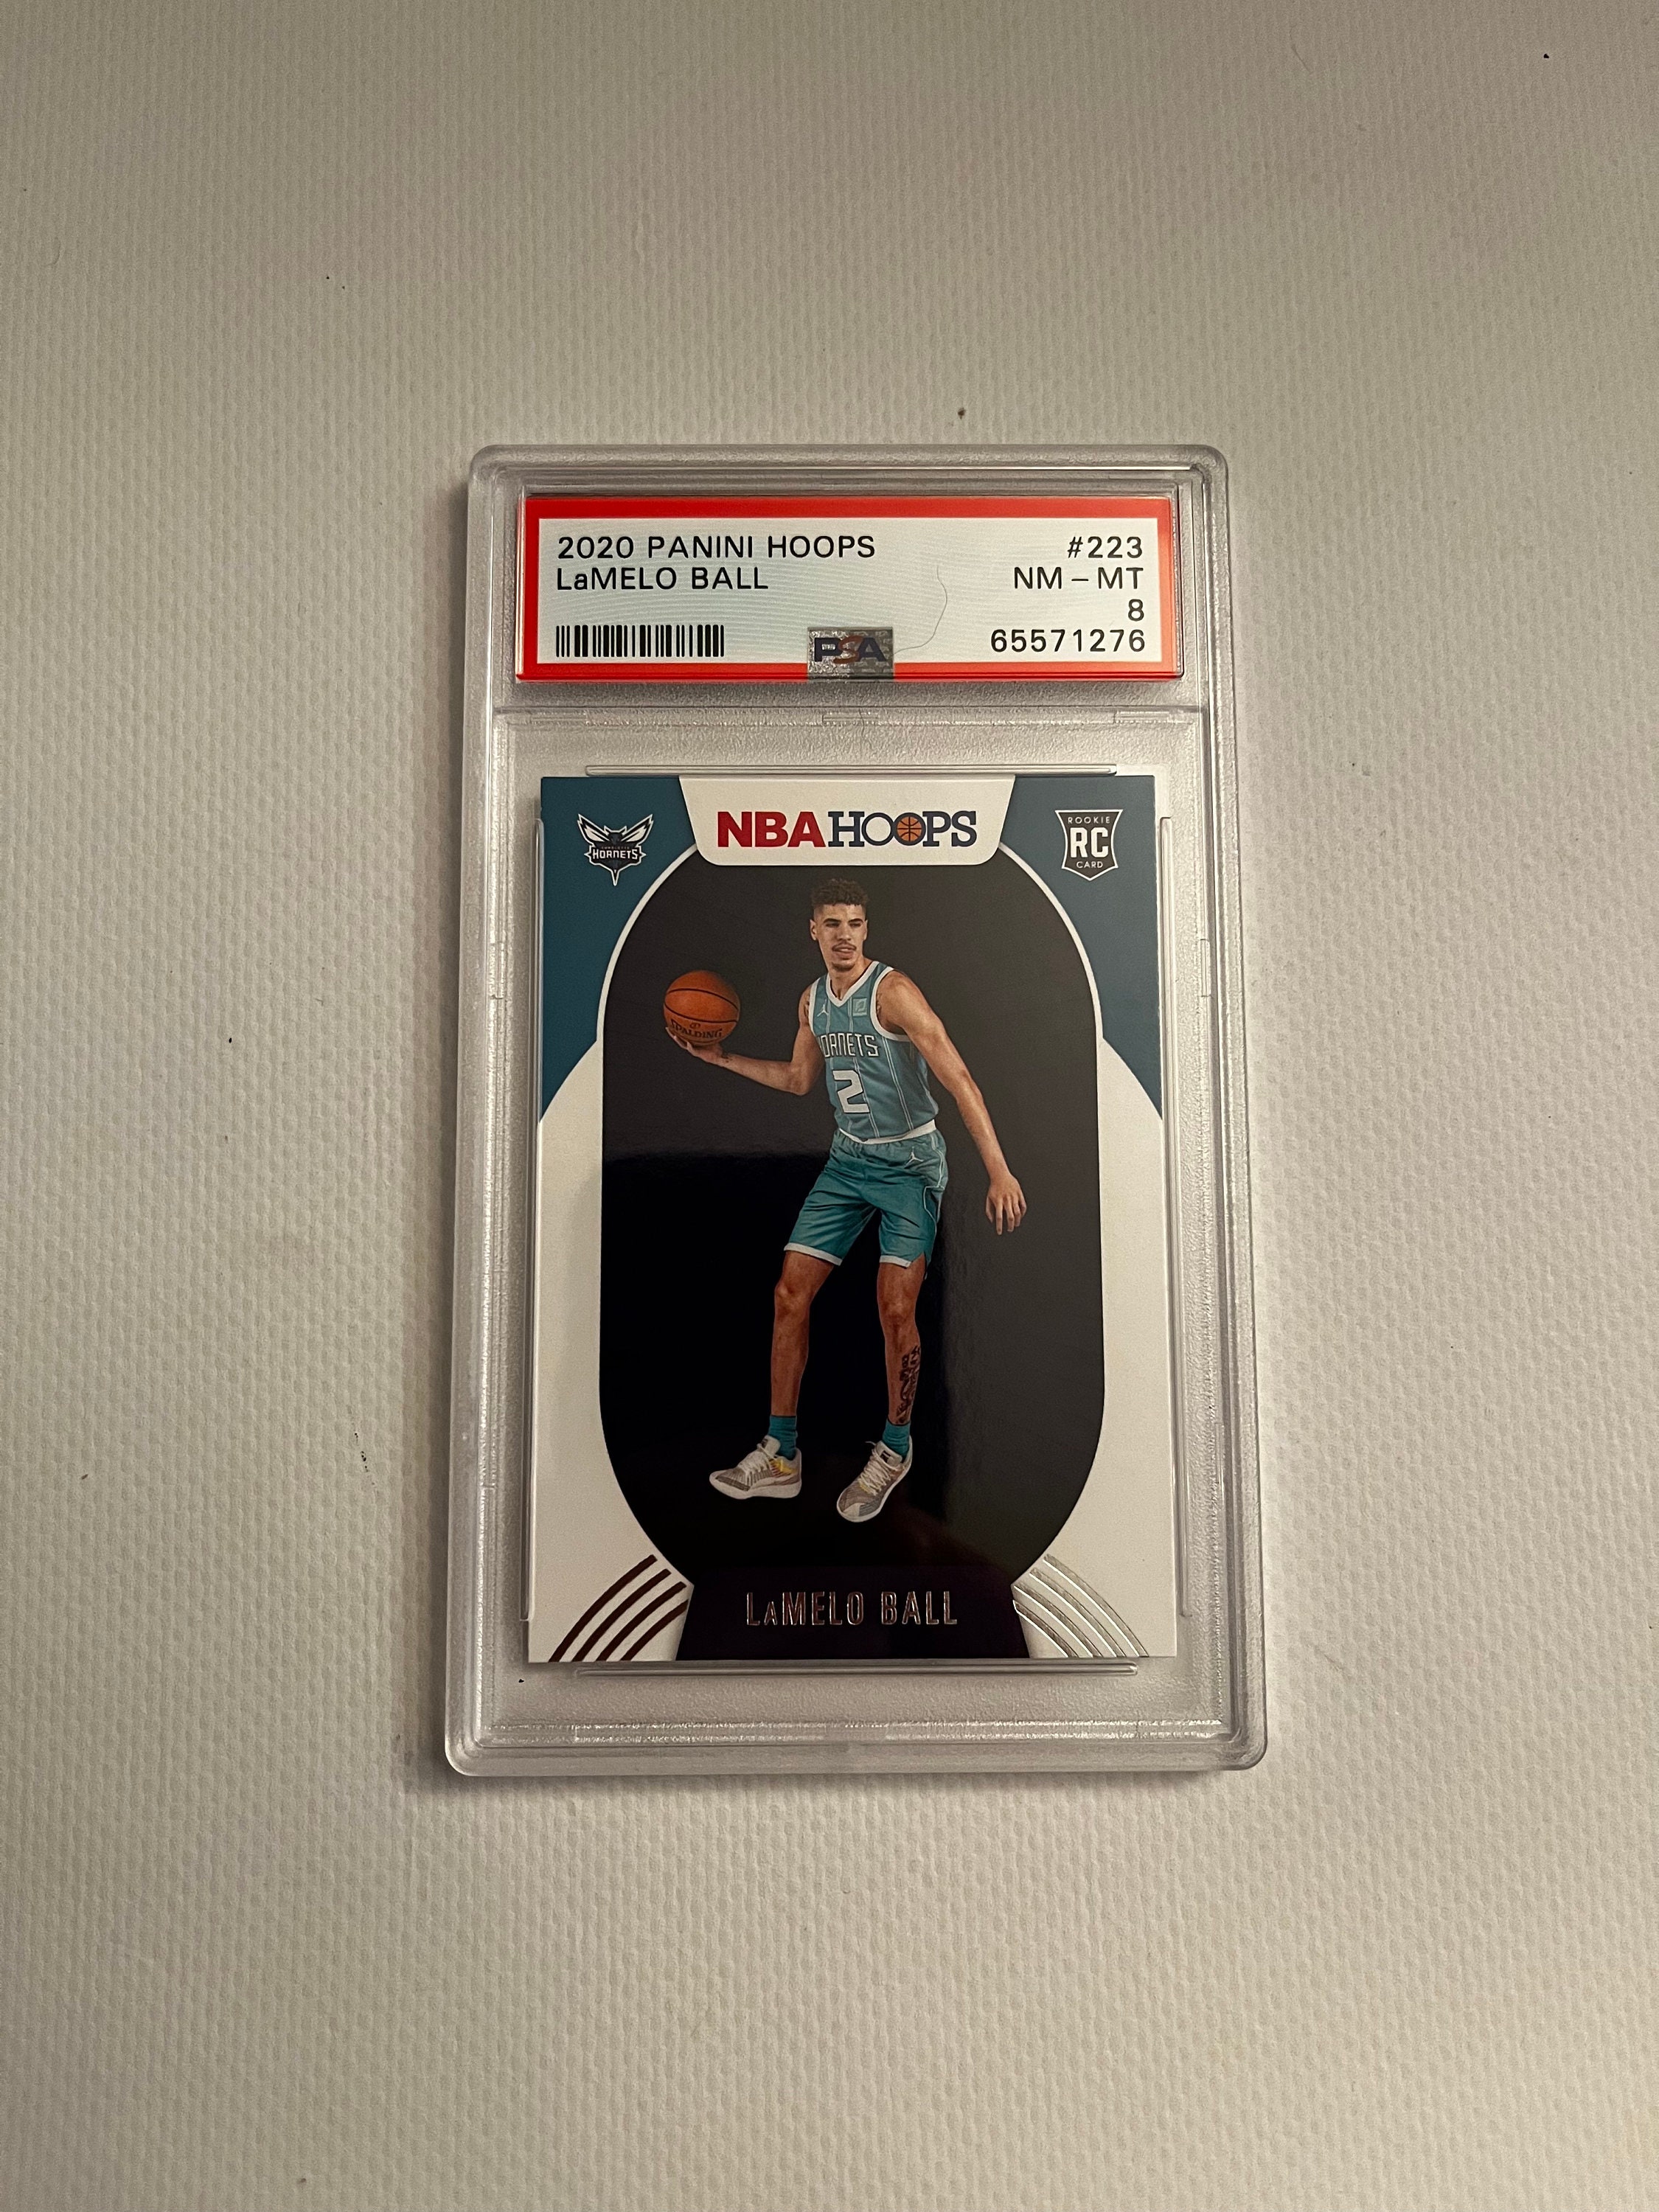 Sold at Auction: (Mint) 2020-21 Panini Marquee RC LaMelo Ball Rookie #266  Basketball Card